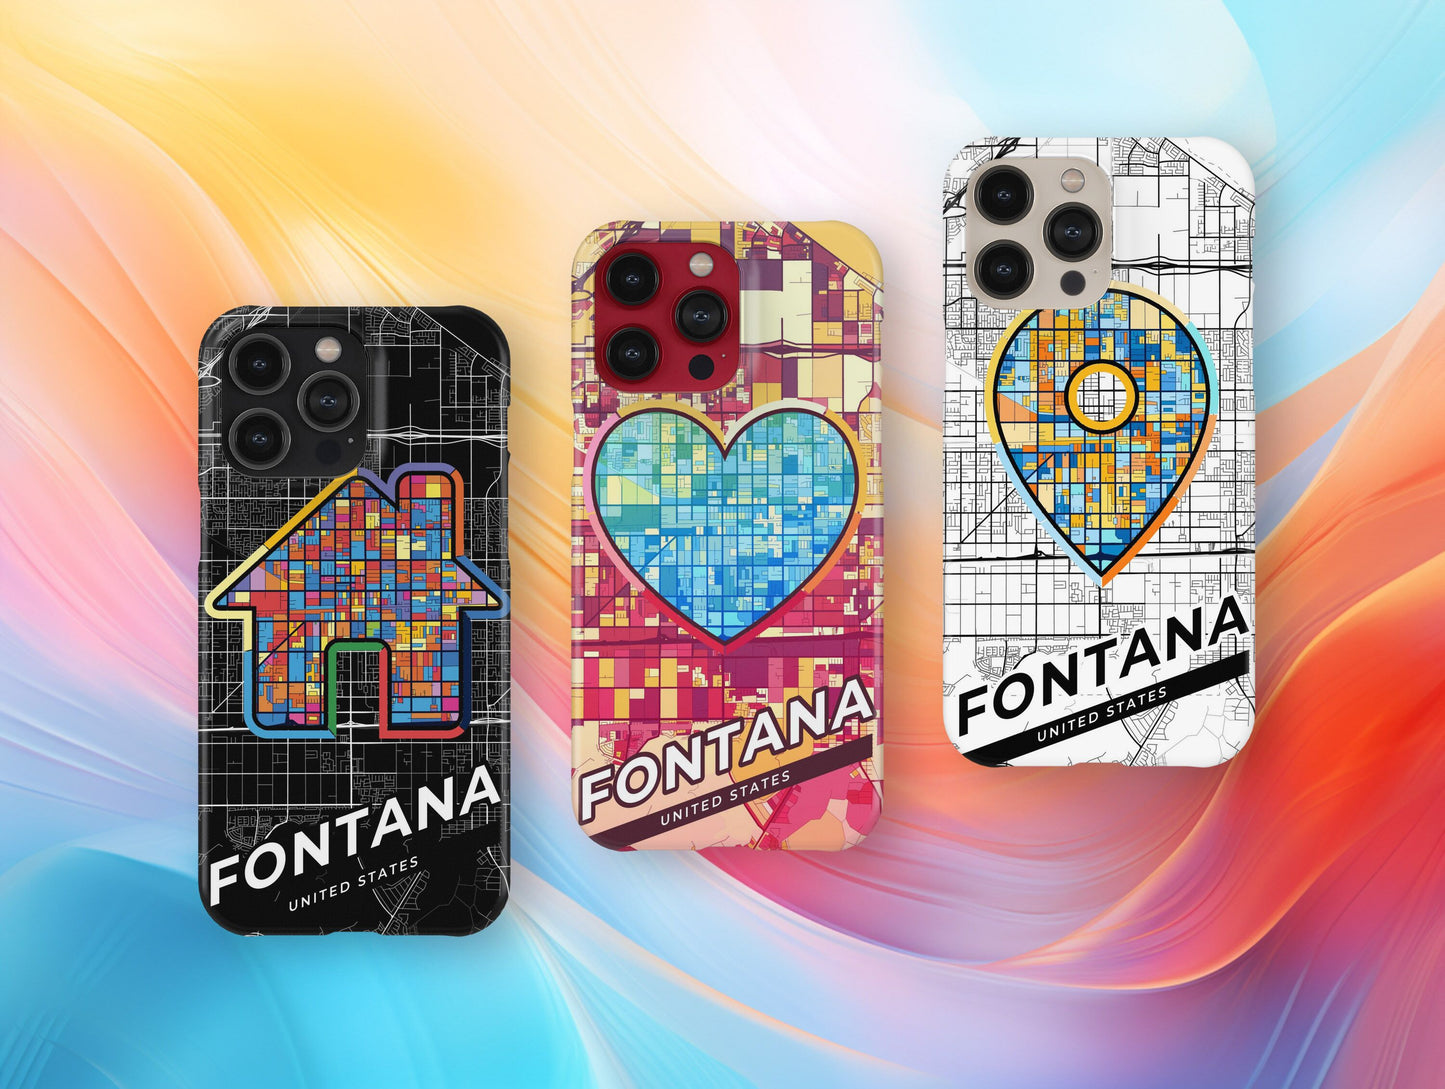 Fontana California slim phone case with colorful icon. Birthday, wedding or housewarming gift. Couple match cases.